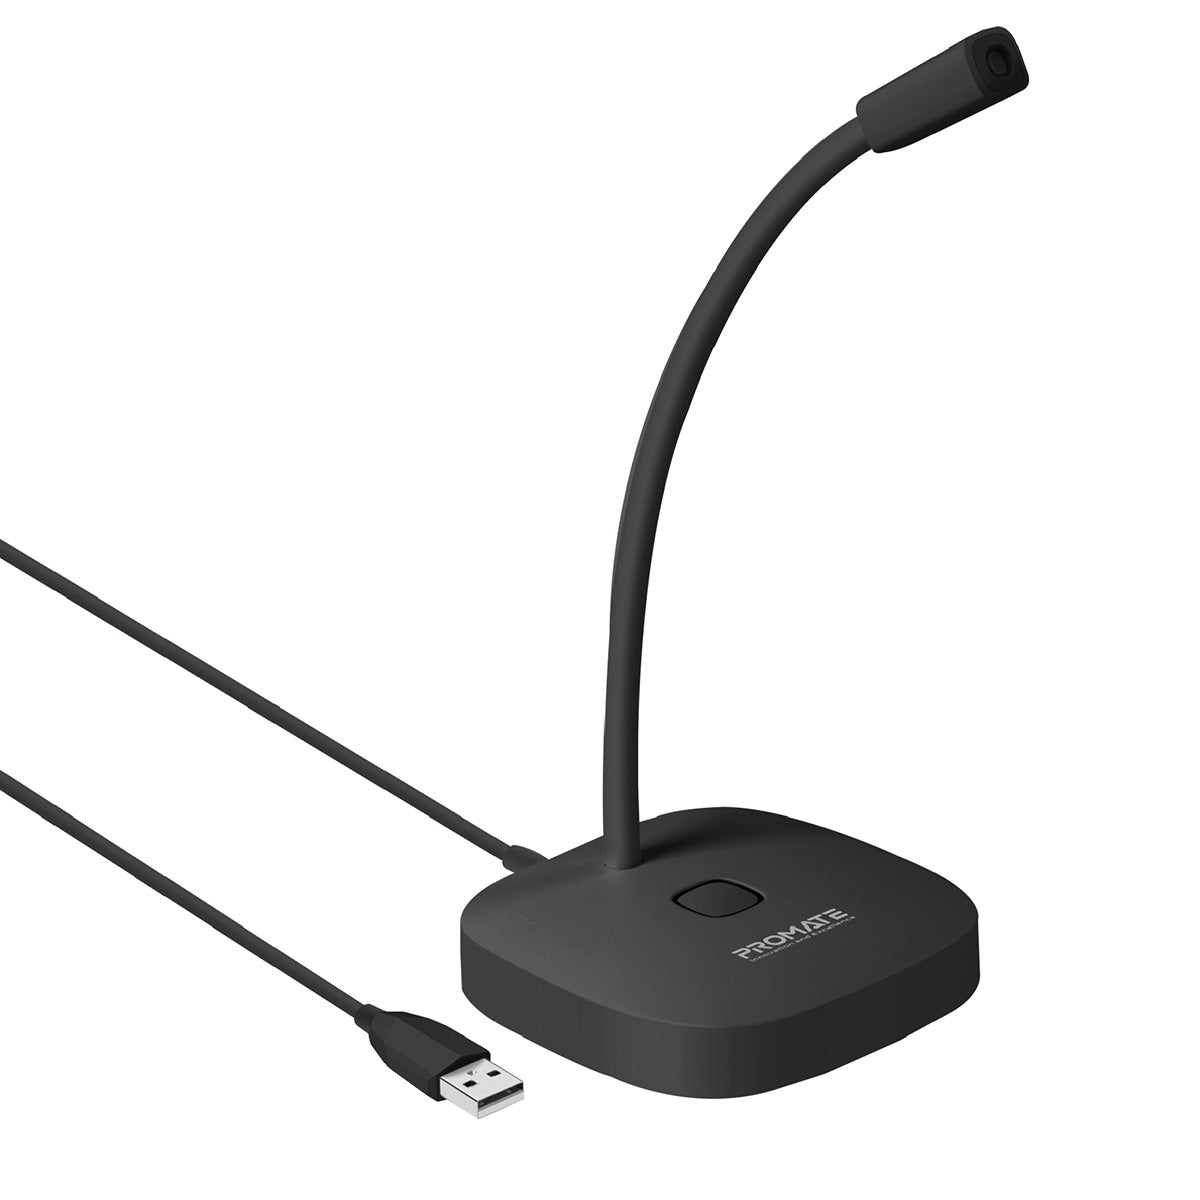 Promate USB Desktop Microphone, High Definition Omni-Directional USB Microphone with Flexible Gooseneck, Mute Touch Button, LED Indicator and Built-In Anti-Tangle Cord for PC, Laptop, Recording, Gaming, ProMic-1